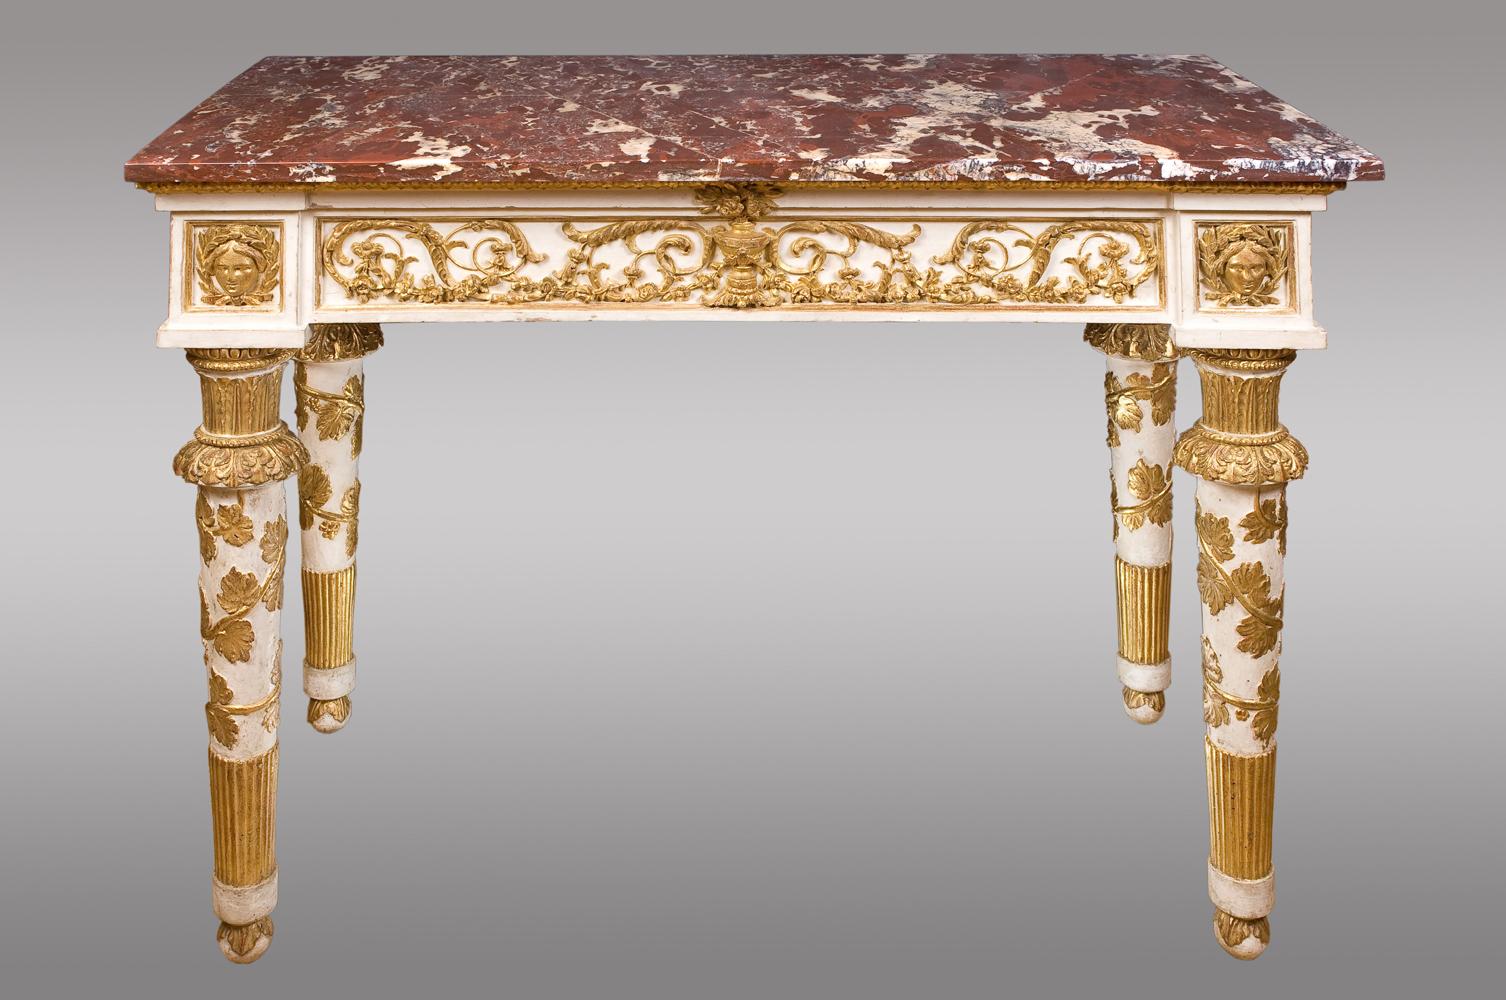 Stucoed and gilded carved wood.
Fronts and sides decorated with scrolls and garlands of flowers, finished in laureate females heads.
Legs decorated with acanthus leaves and top and vine leaves that descend around.
Each console with